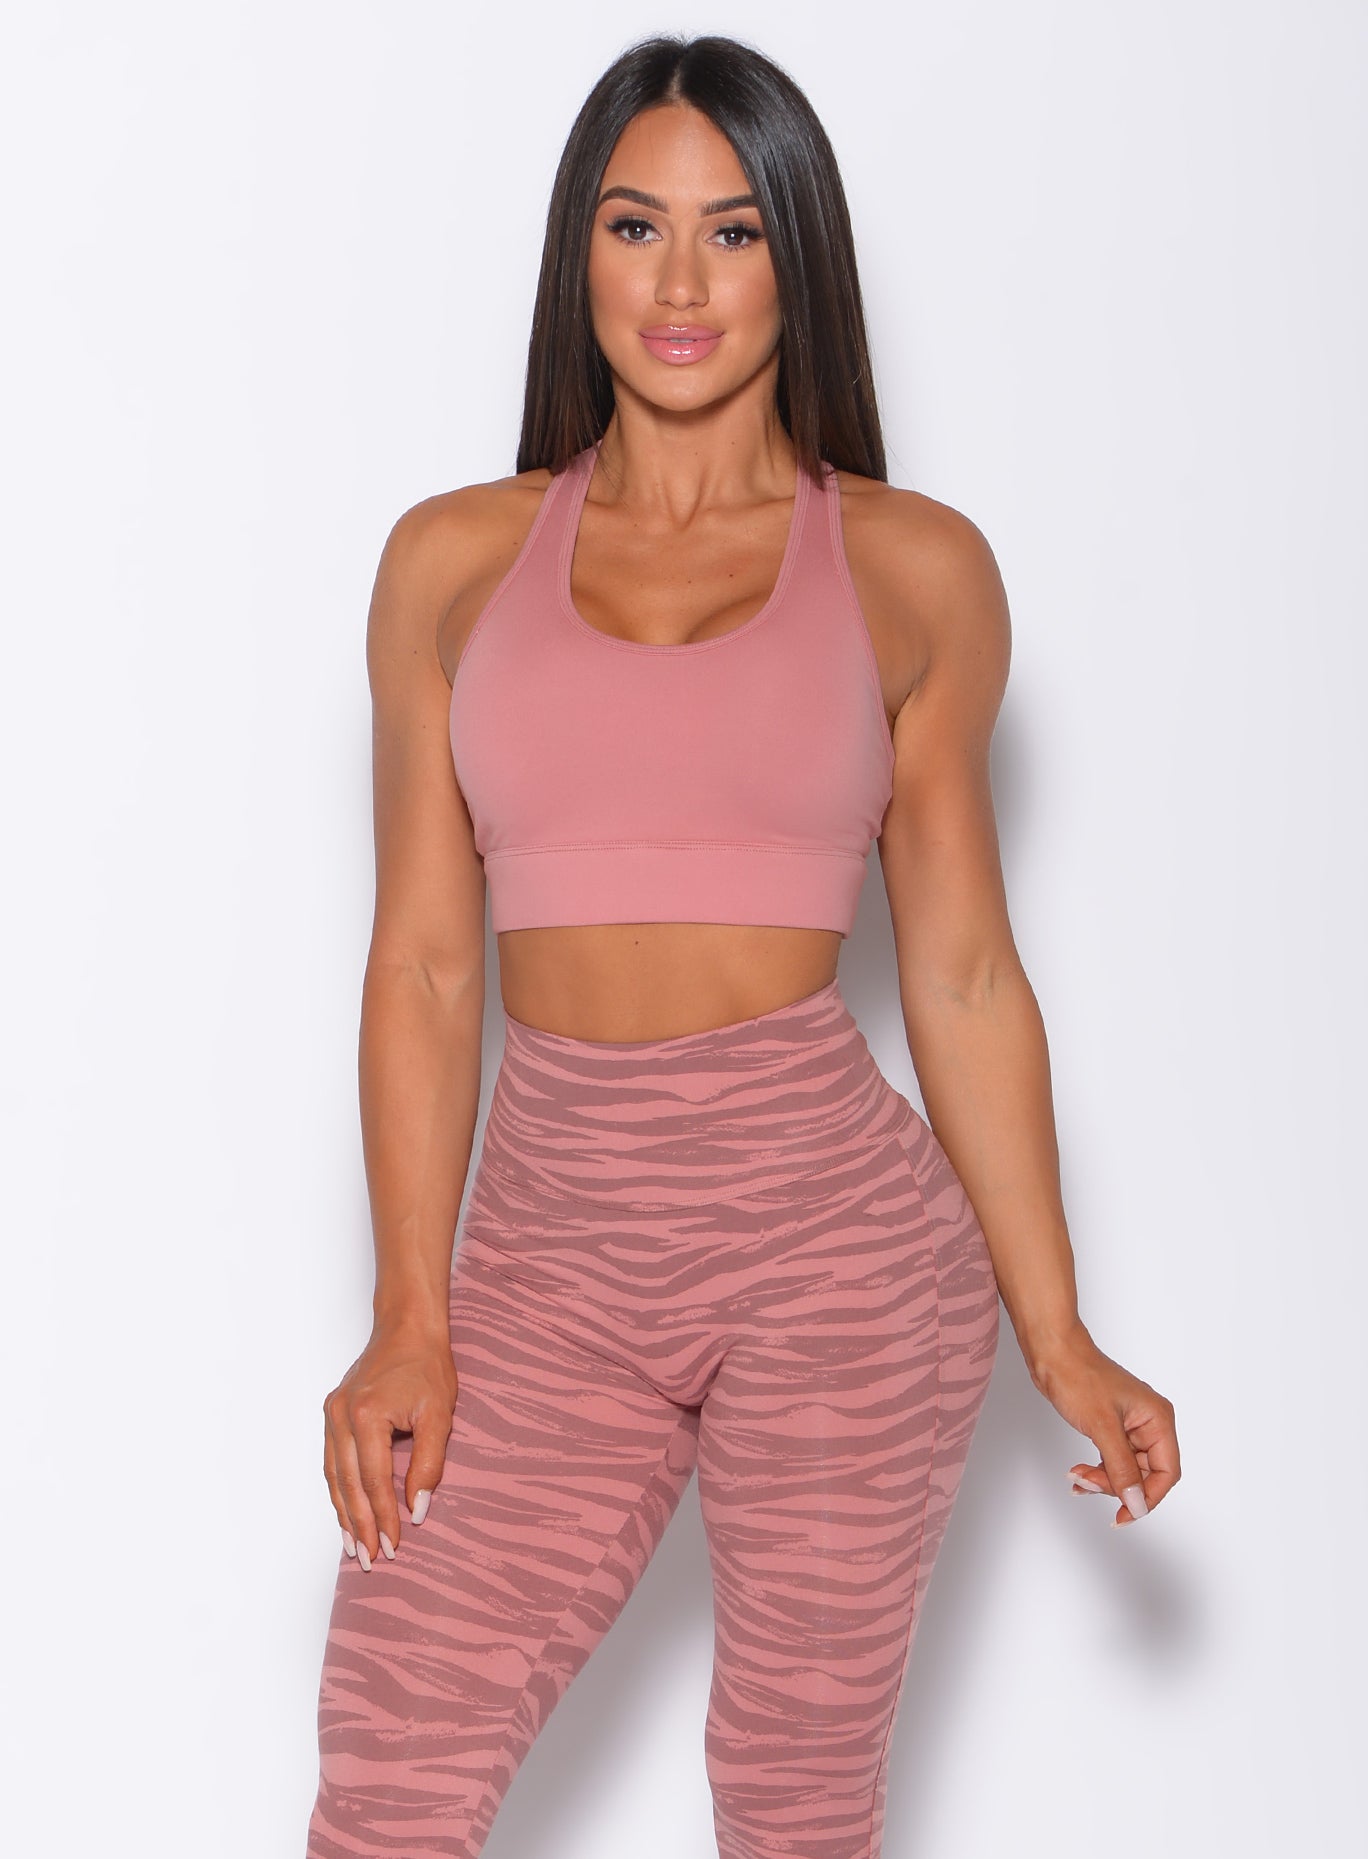 Front profile view of a model wearing our rival sports bra in solid blush color and a matching tiger print leggings